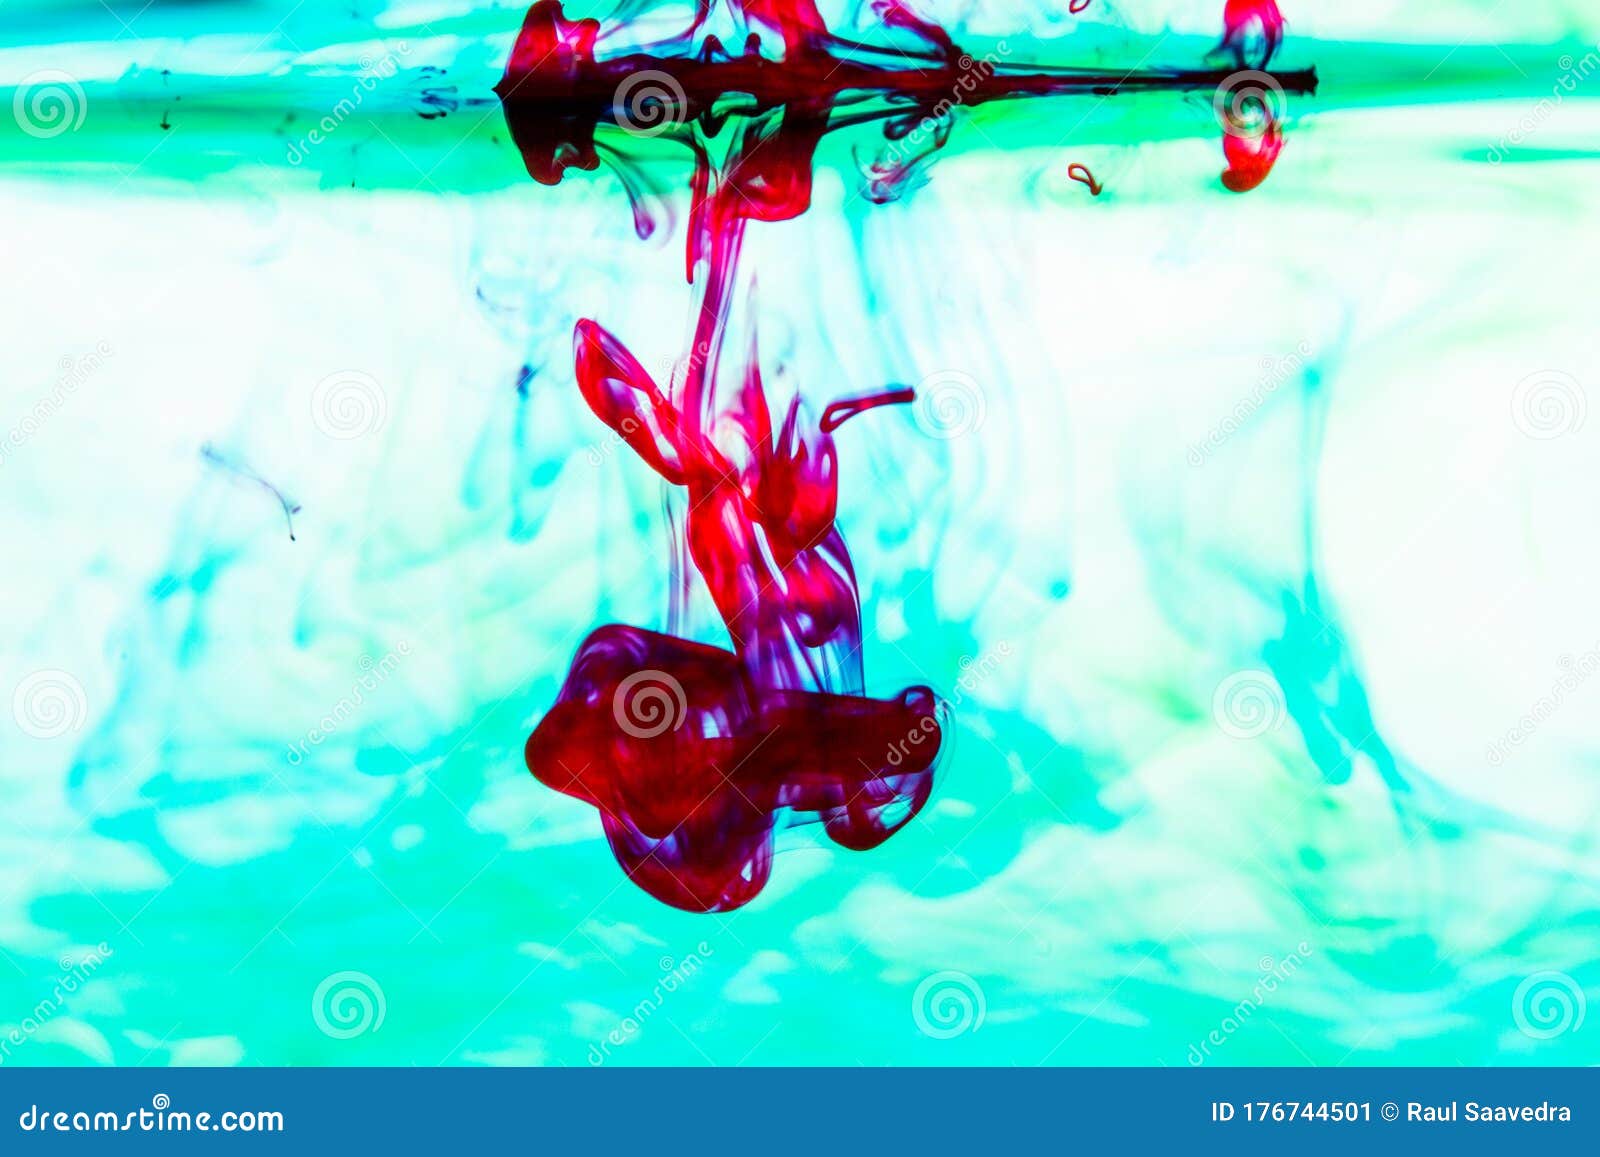 Colored Liquids Flowing in Water Stock Image - Image of making, liquid ...